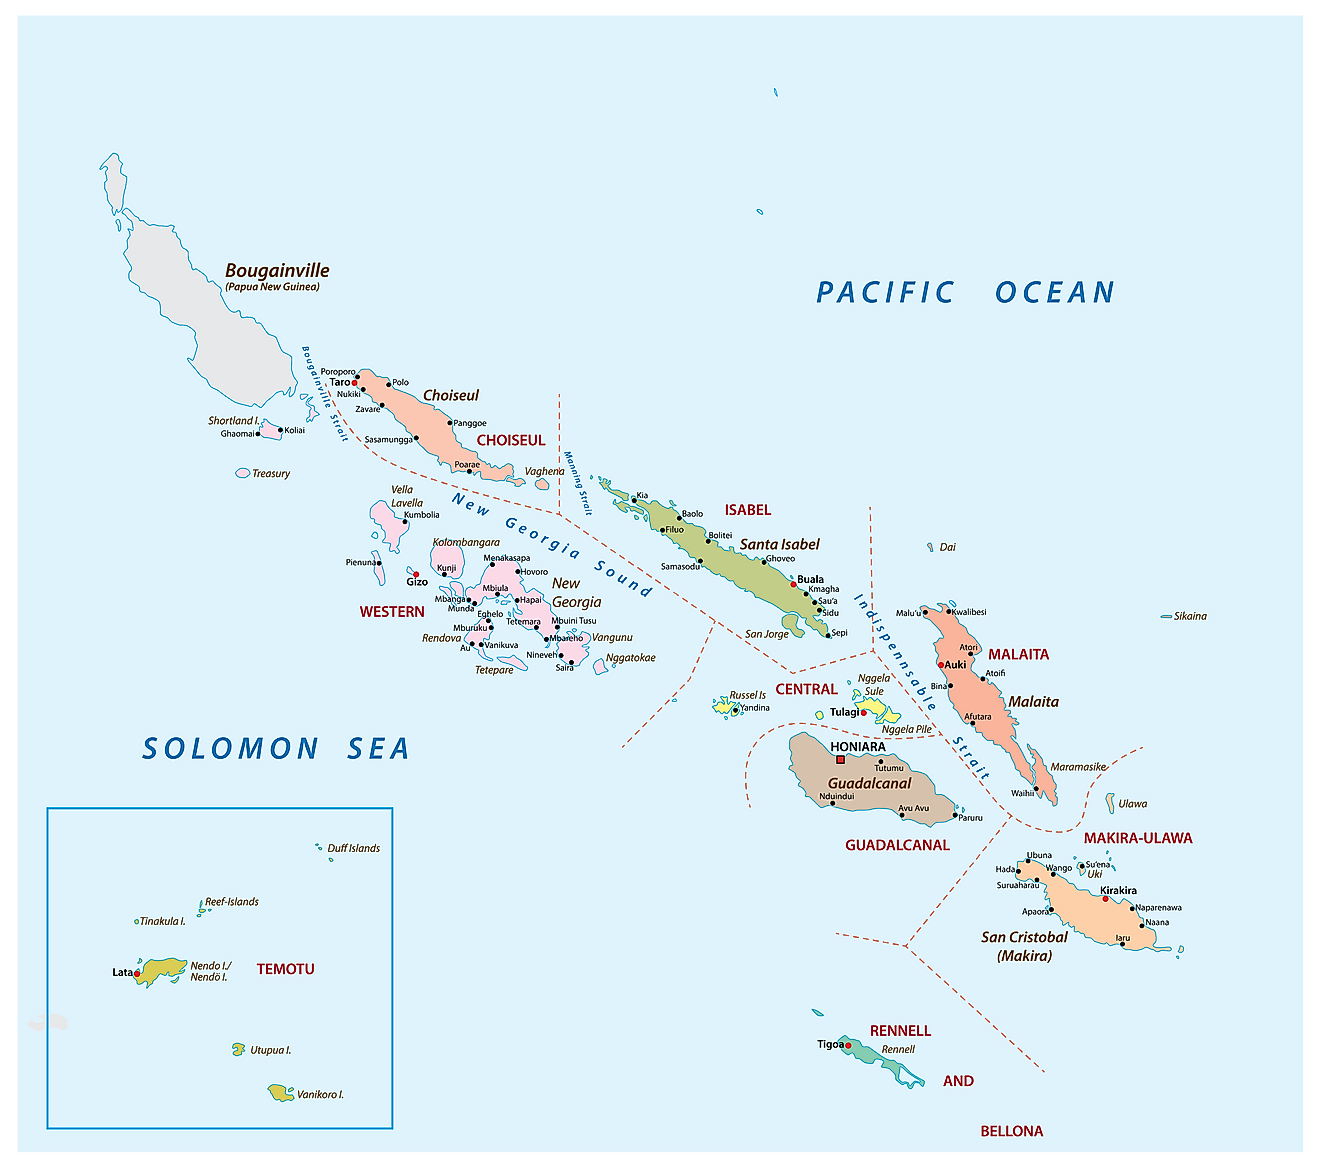 Political Map of Solomon Islands showing its 9 provinces and the capital city Honiara